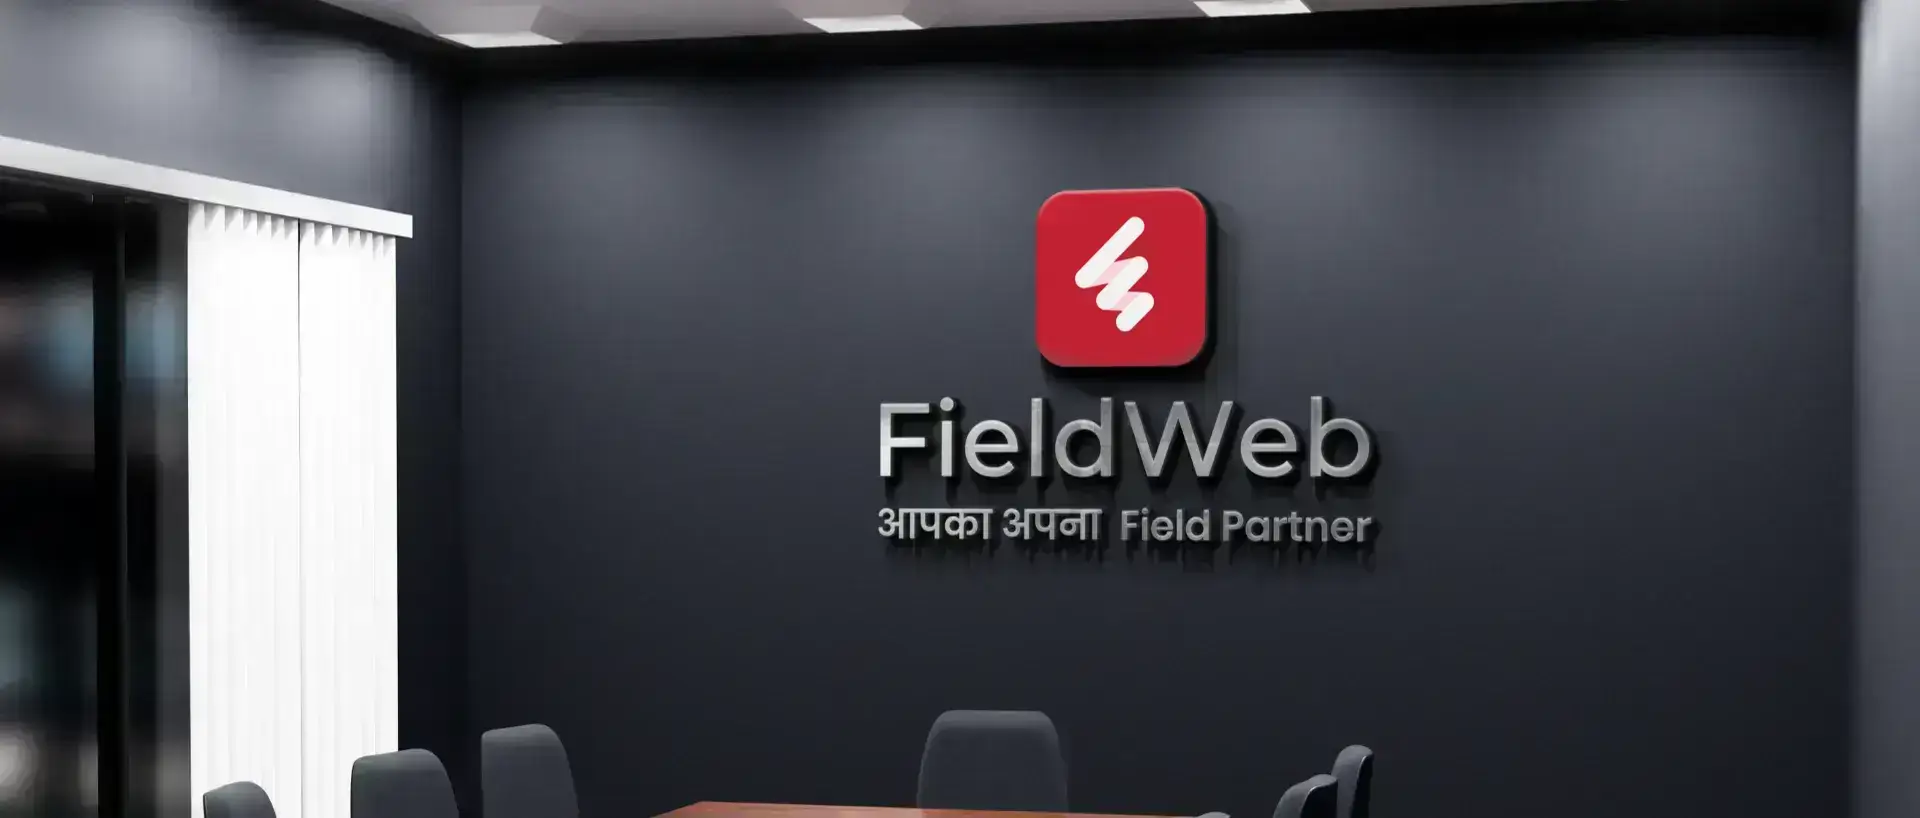 The FieldWeb logo features a red emblem with a white center, in gray text on a charcoal black background  also includes Hindi words, with a modern aesthetic.